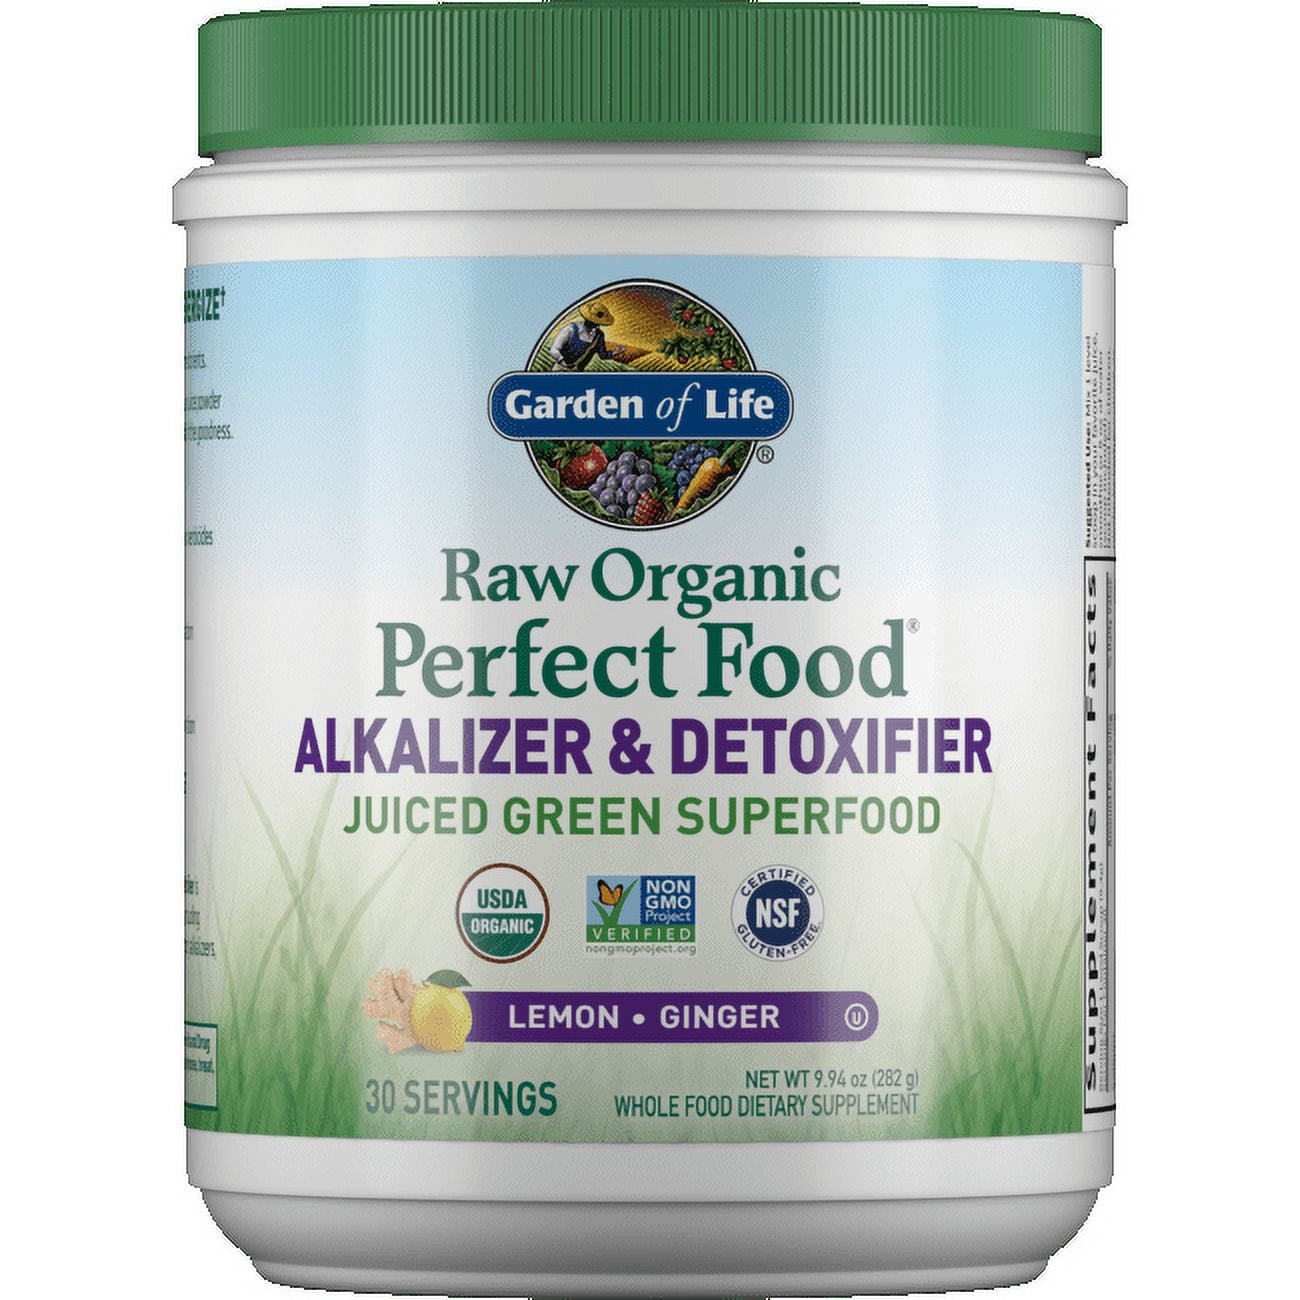 Greens Powder Smoothie Mix  Purely Inspired Organic Greens Powder  Superfood, Unflavored, 24 Servings (Package May Vary), 8.57 Ounce (Pack of  1) 